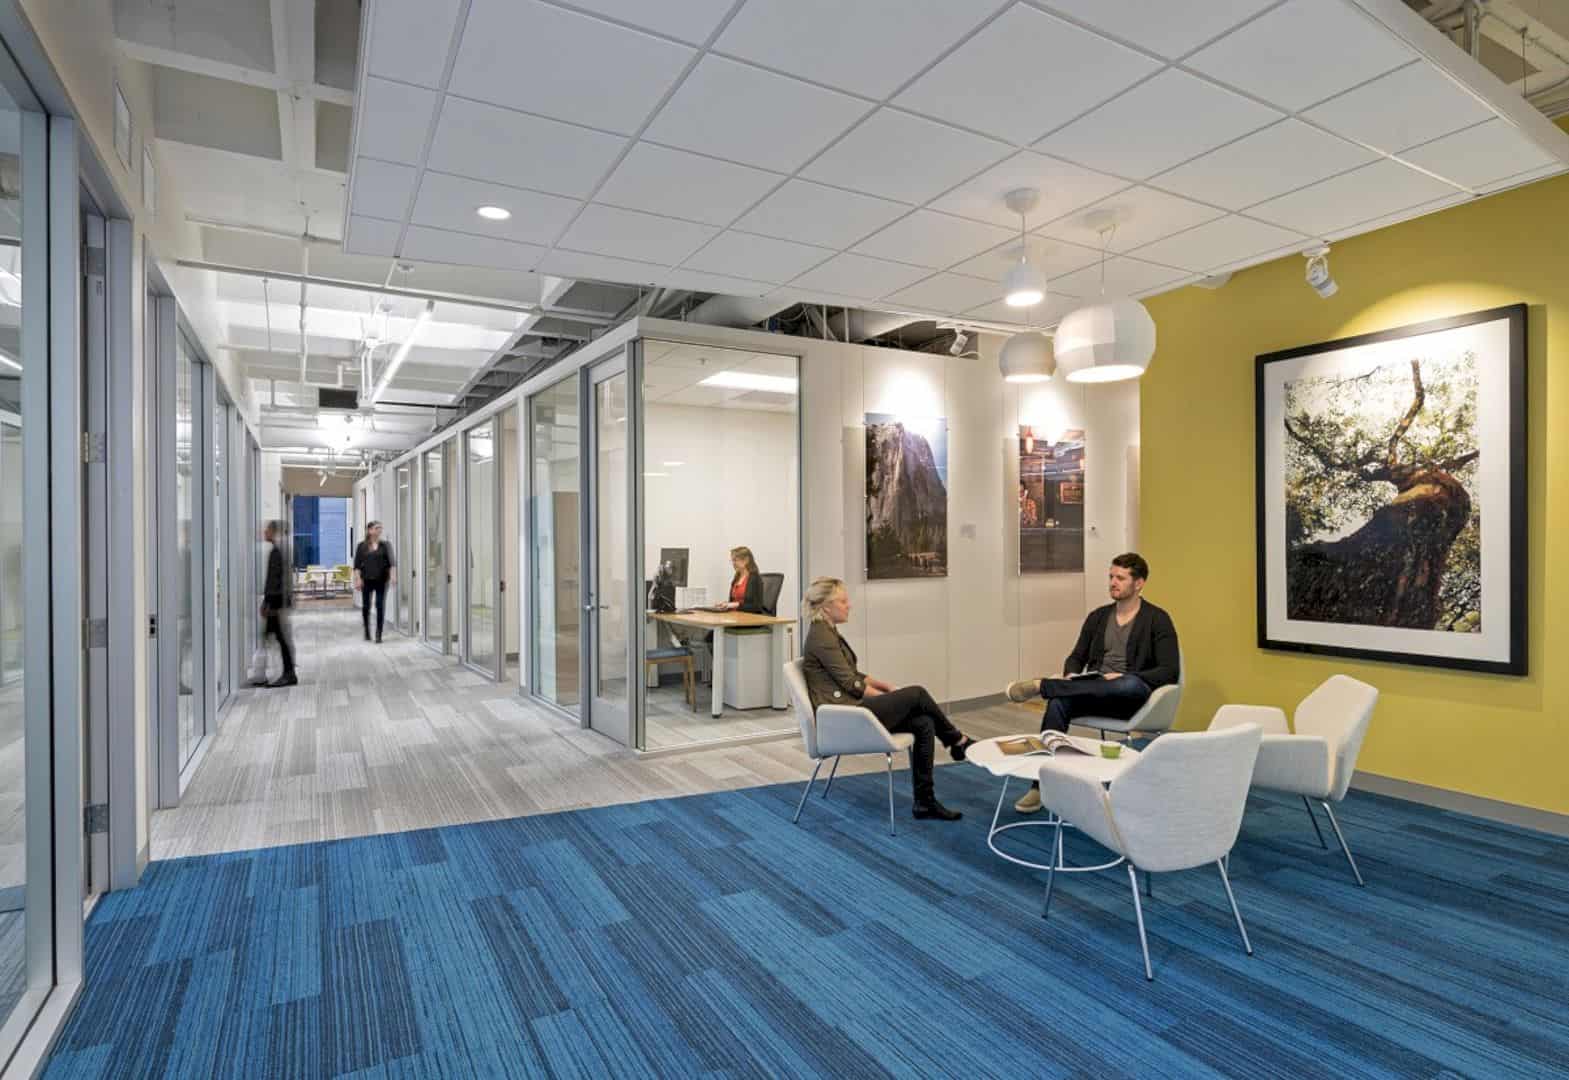 New Resource Bank Promotes Sustainability Through Leed Gold Office Design 3